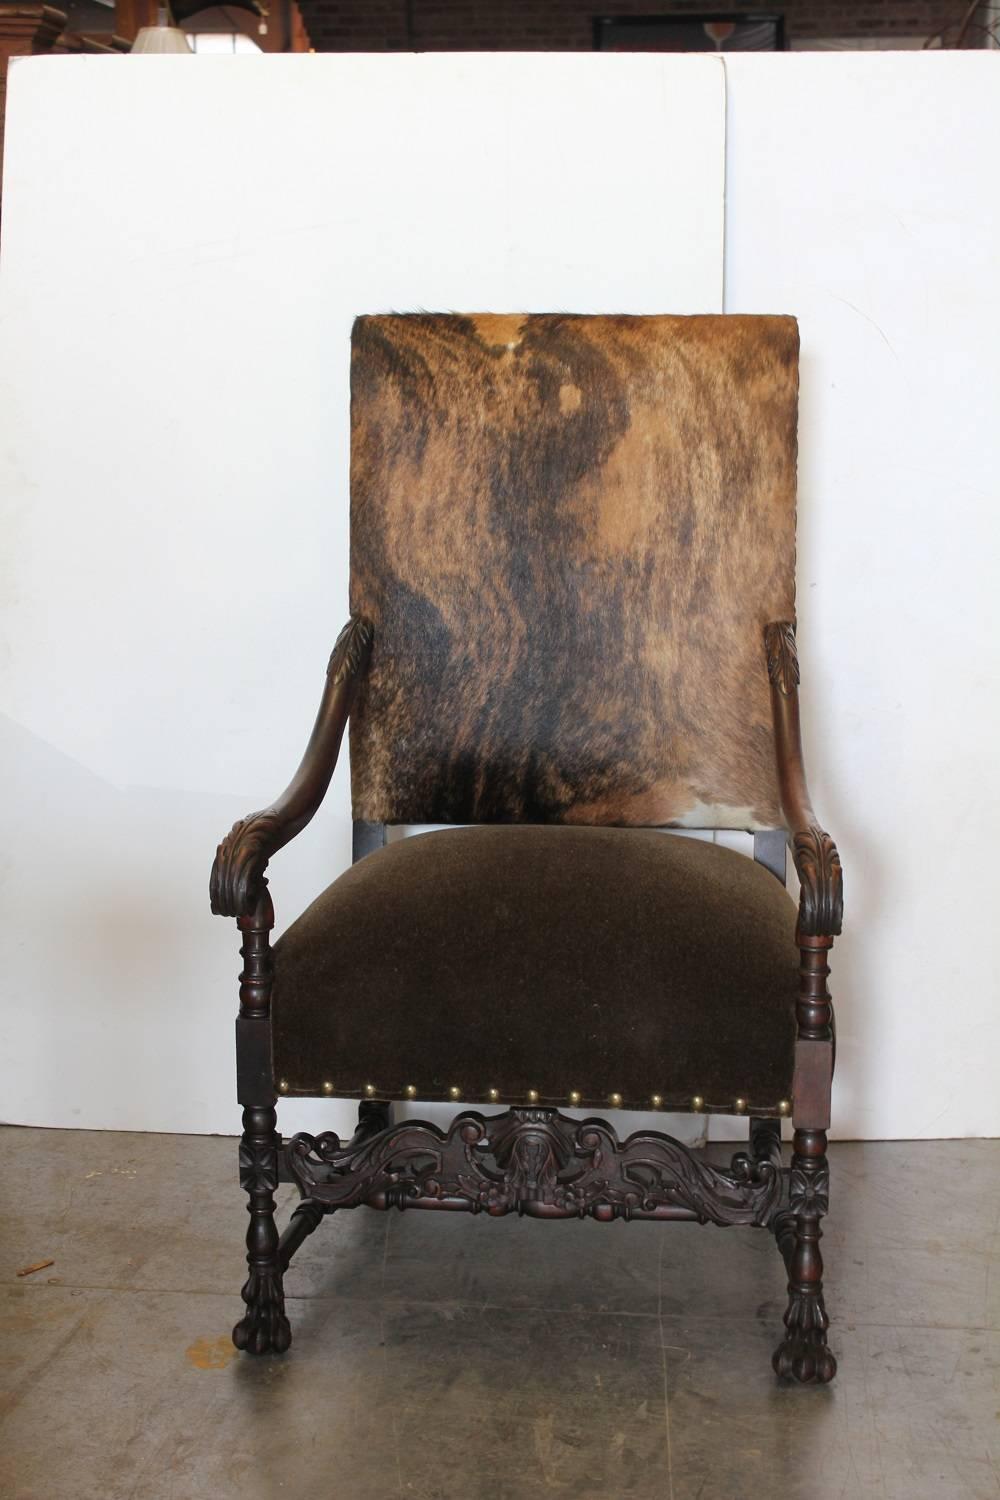 Spectacular 19th century French Louis XIV style carved walnut armchair with new cowhide and mohair upholstery.